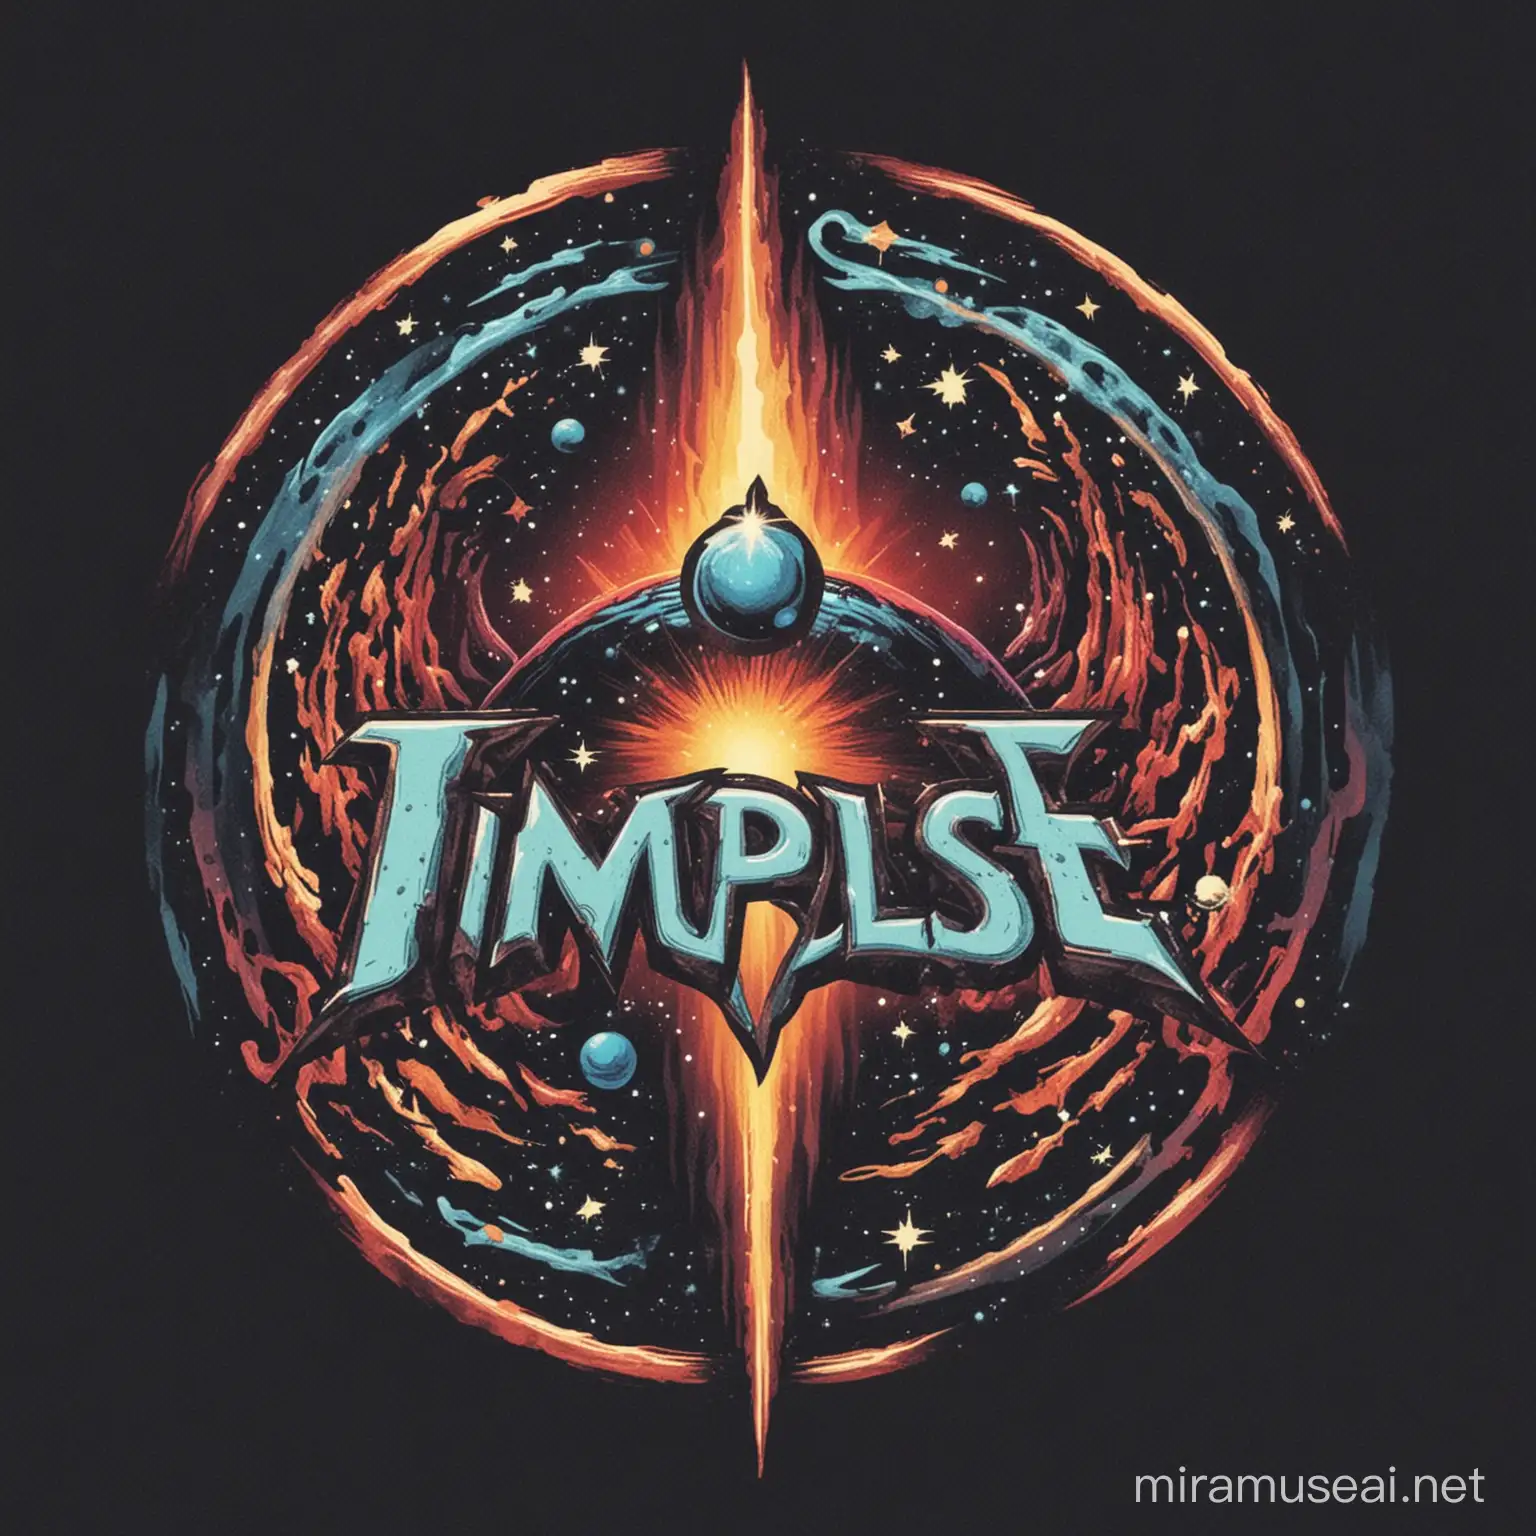 A band logo for a band called "Impulse". They play: hard blues rock, space rock, progressive rock and psychedelic rock. The logo shouldn't be too cluttered, but should stand out and convey a sense of grandeur.